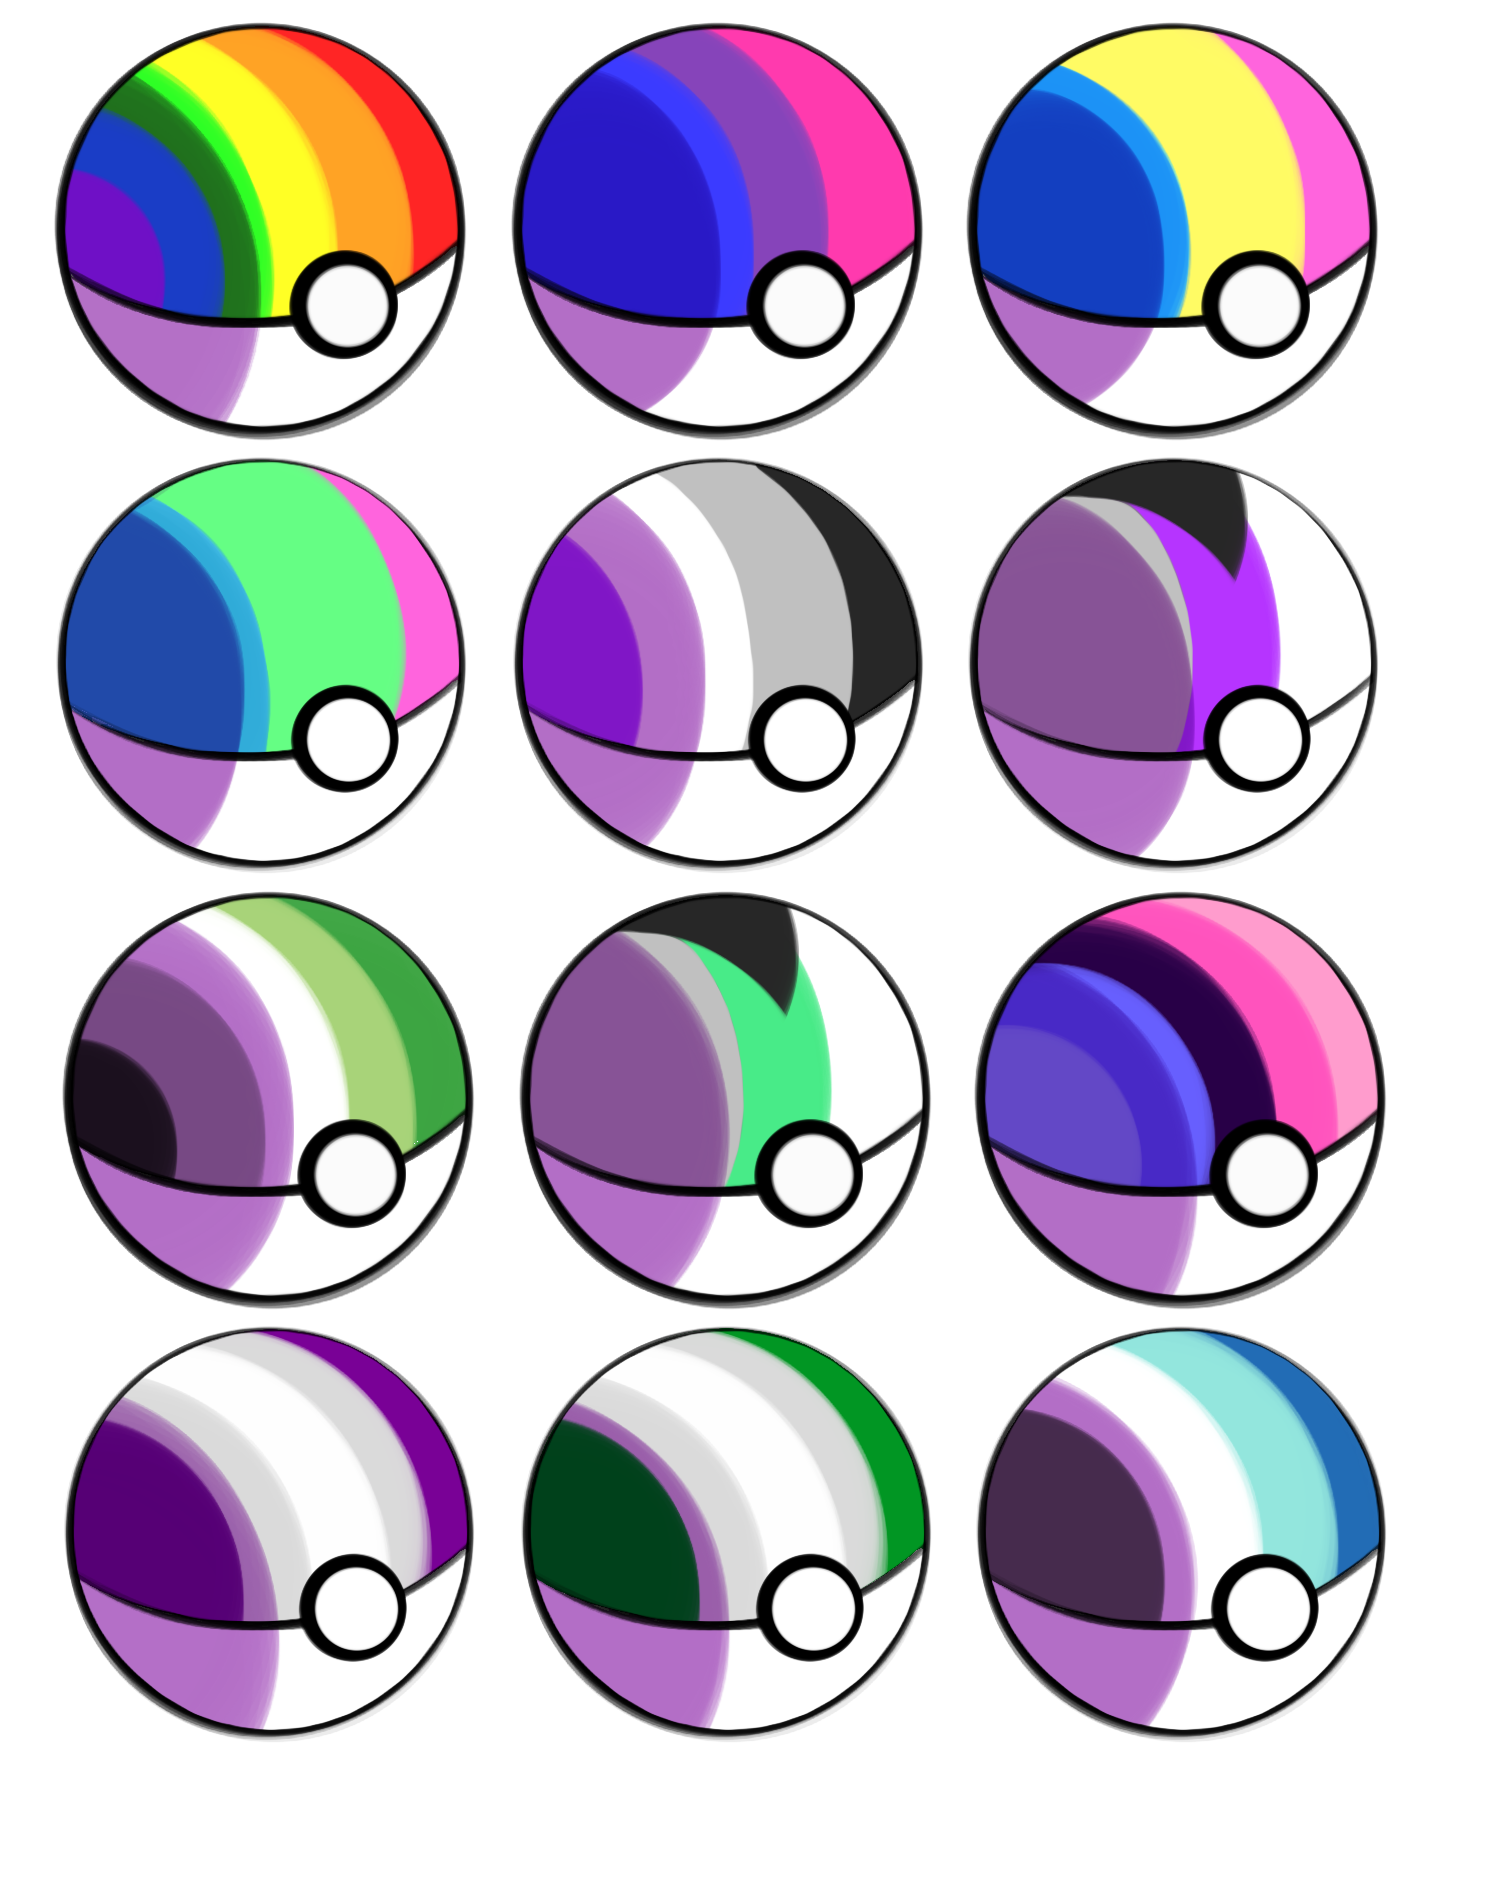 Pokeball clipart. Free download transparent .PNG